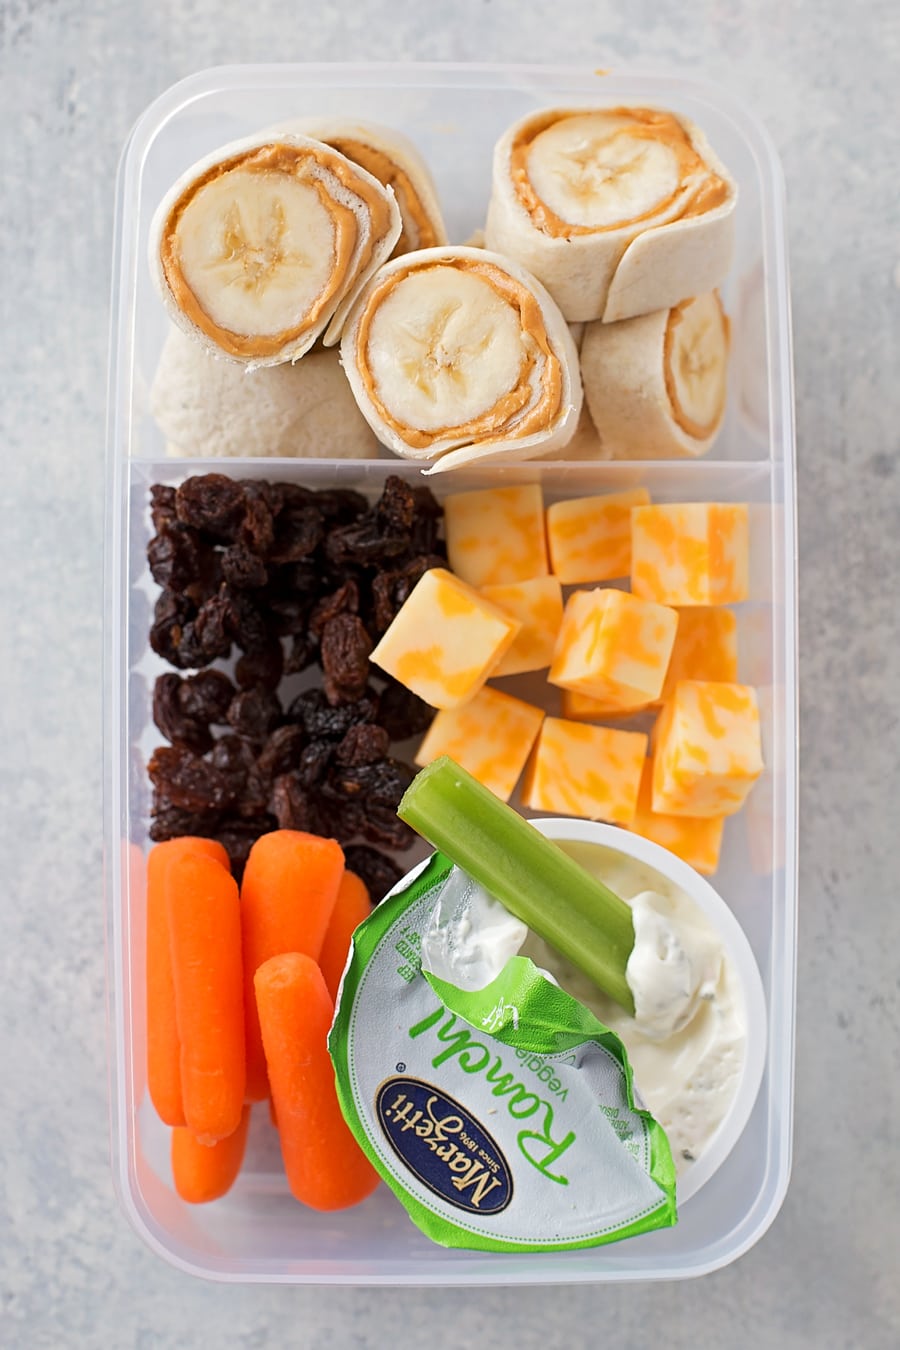 Healthy lunch box idea with peanut butter bananas, cheese, raisins, and carrots